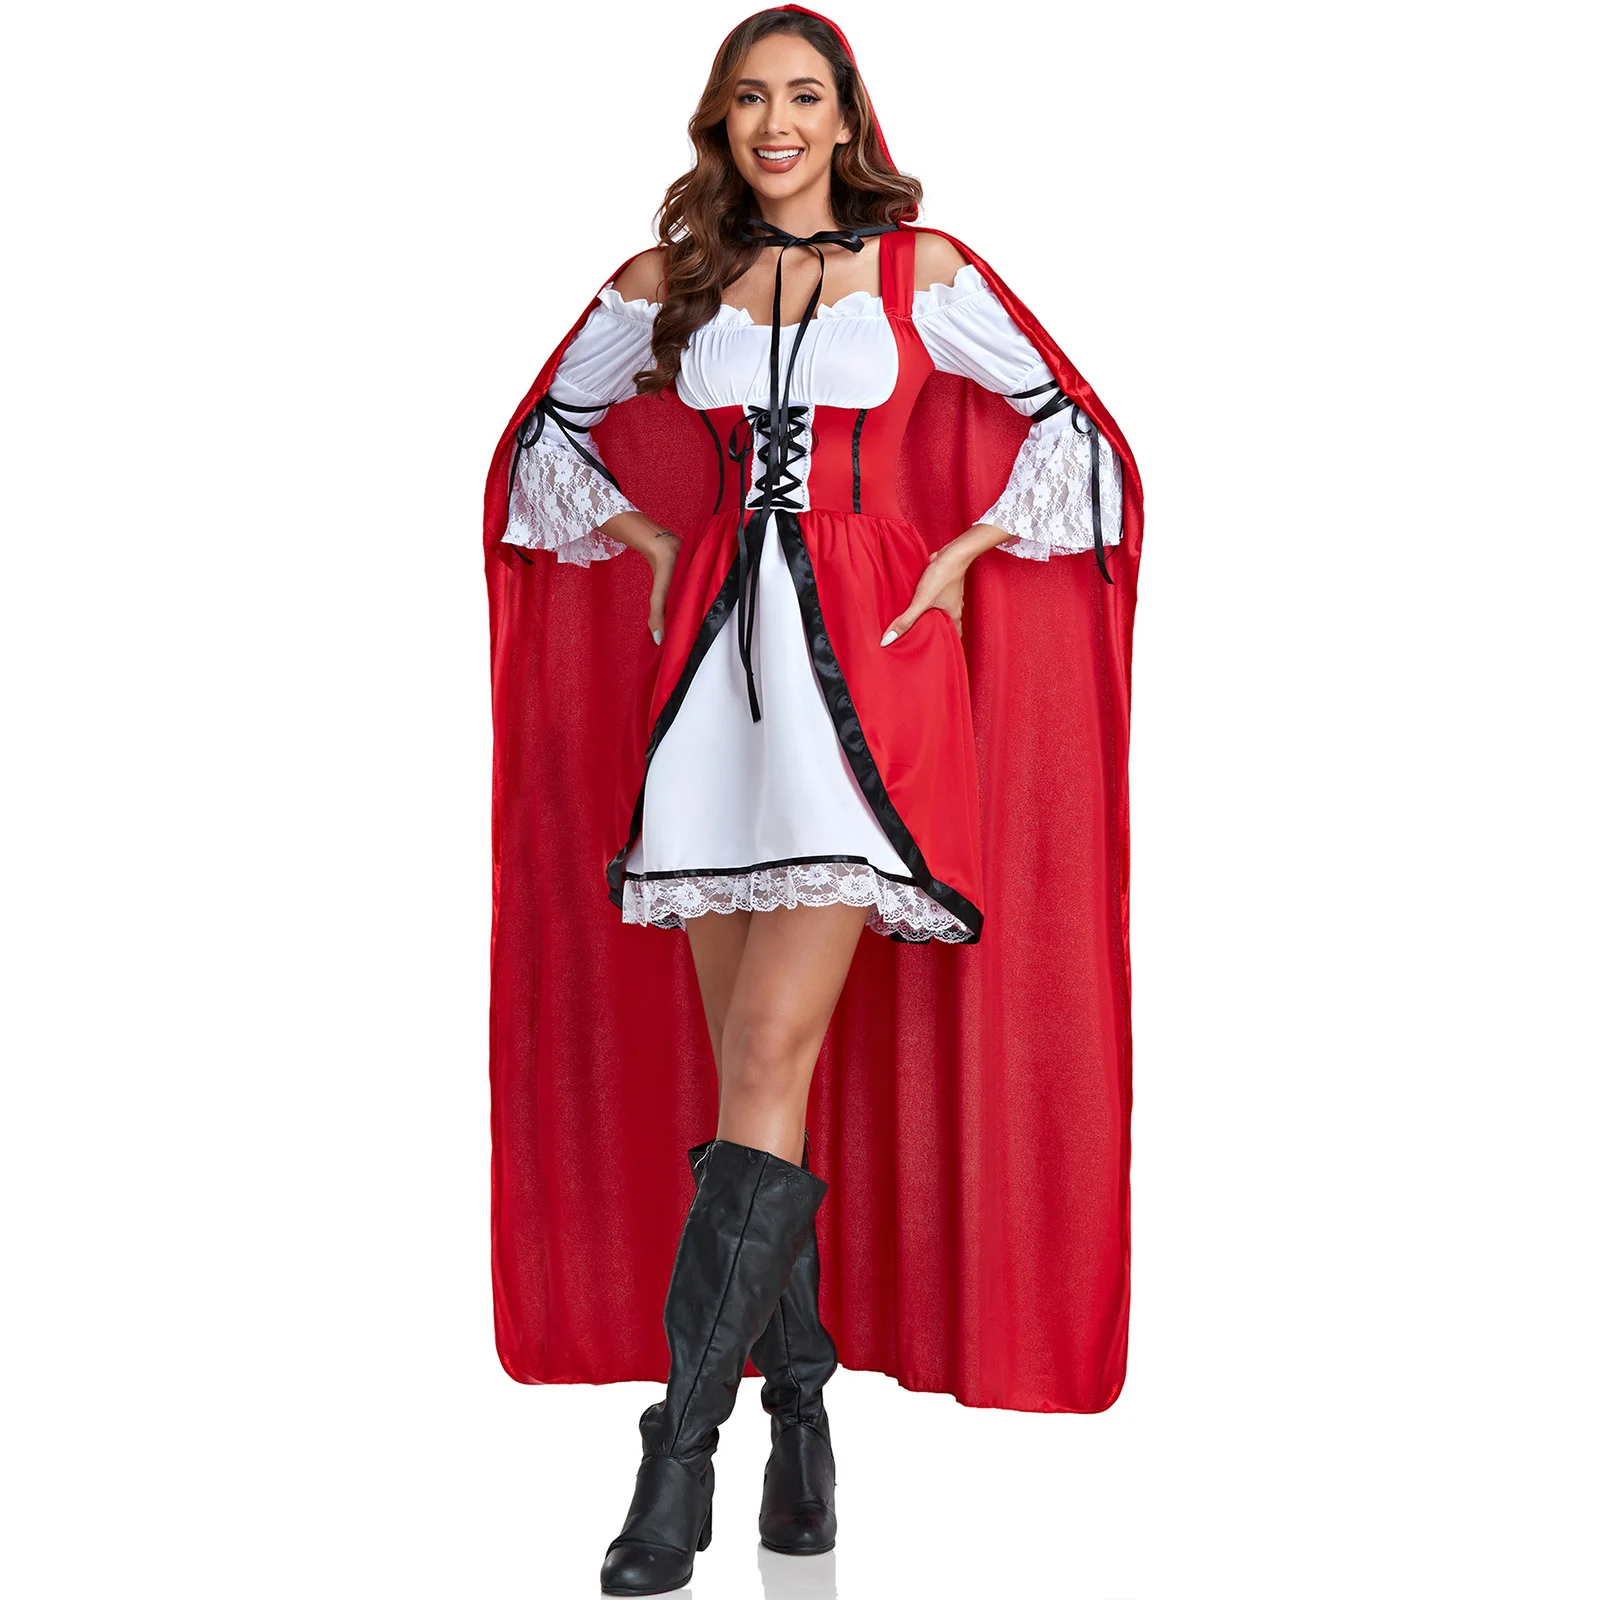 

Anime Red Little Riding Hood Costume For Women Carnival Christmas Halloween Party Mini Dress Hoodie Cape Adult Role-Playing